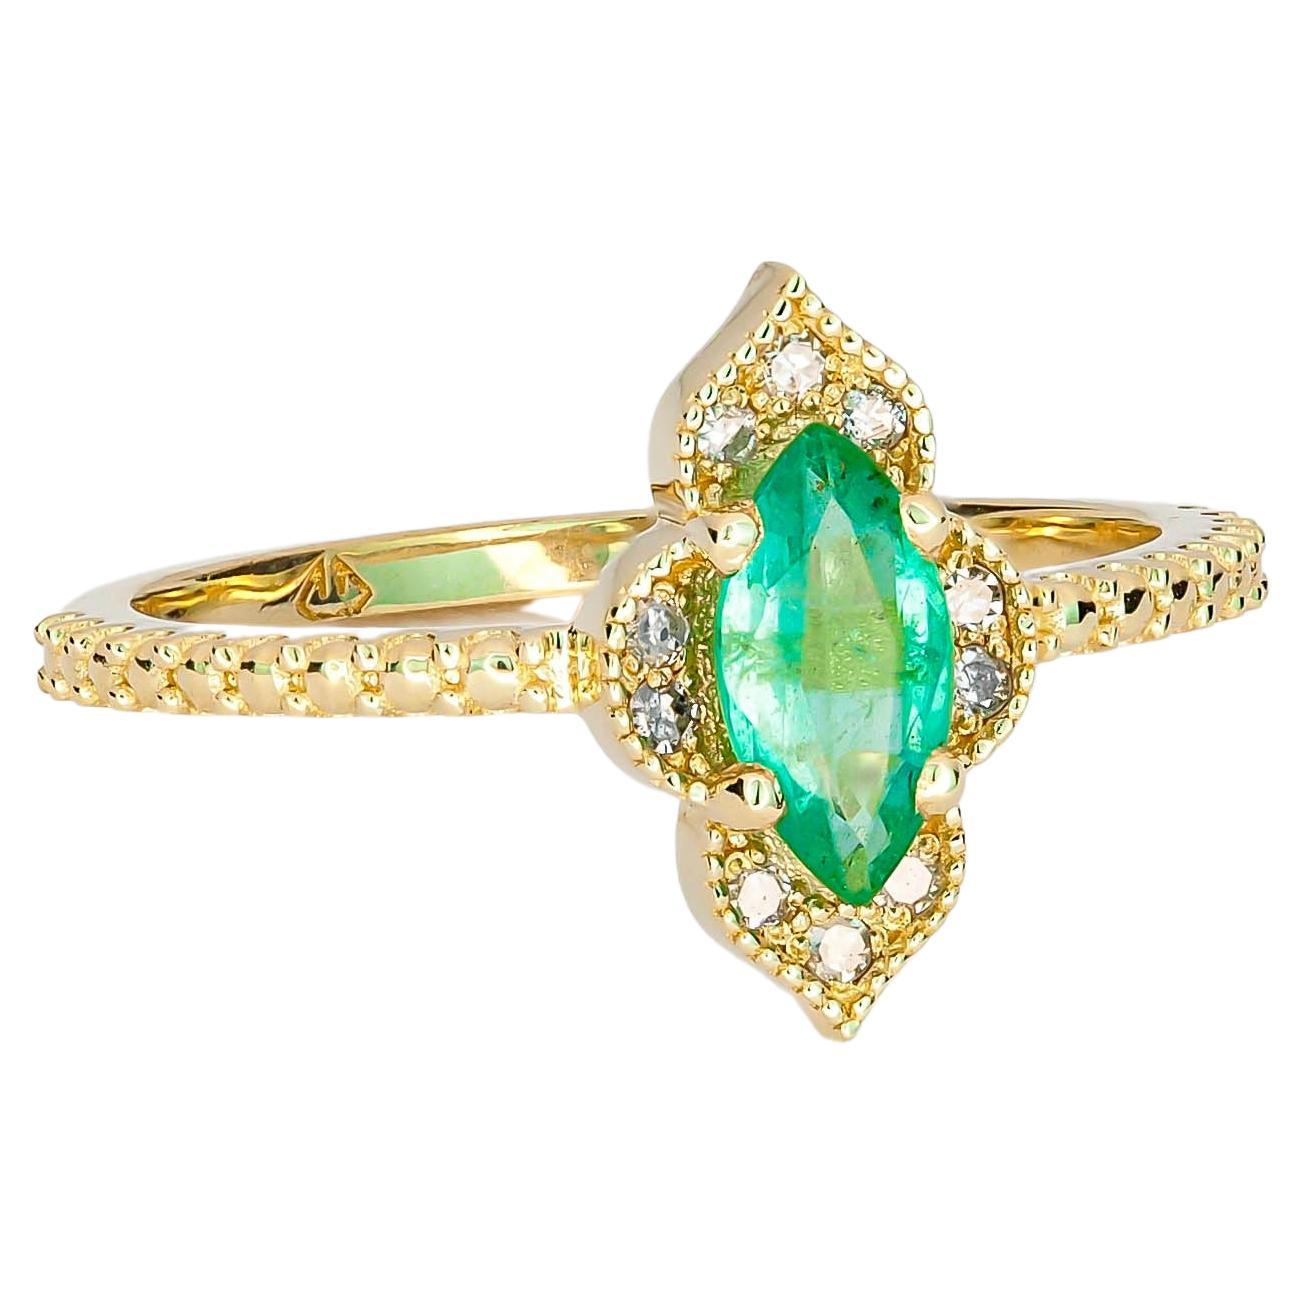 14 karat Solid Gold Ring with Natural Emerald and Diamonds